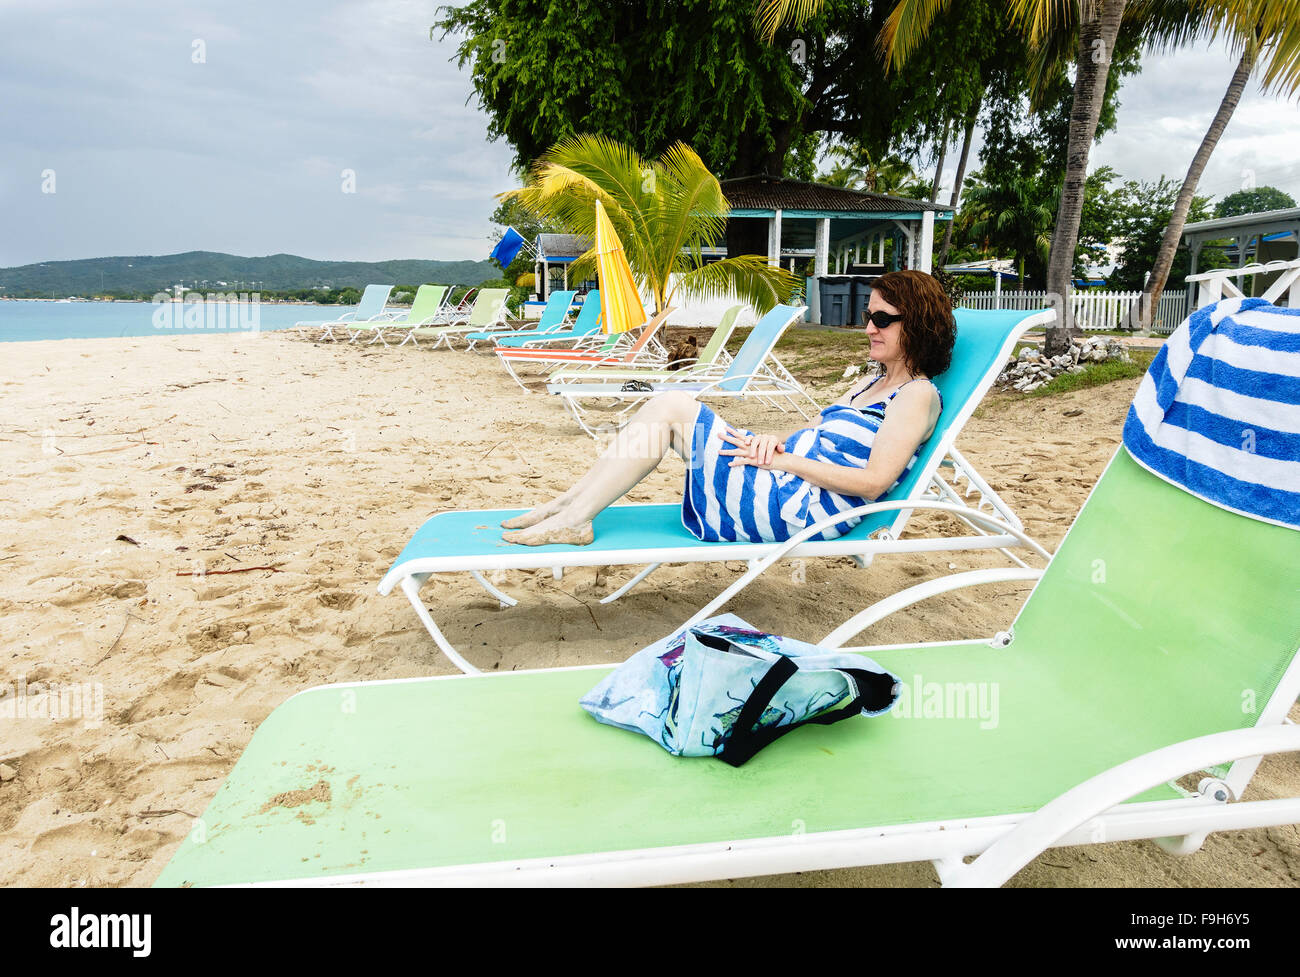 A 50 year old female guest at a beachside resort, wraps up in a beach towel and looks out to sea. St. croix, U.S. Virgin Islands. Stock Photo